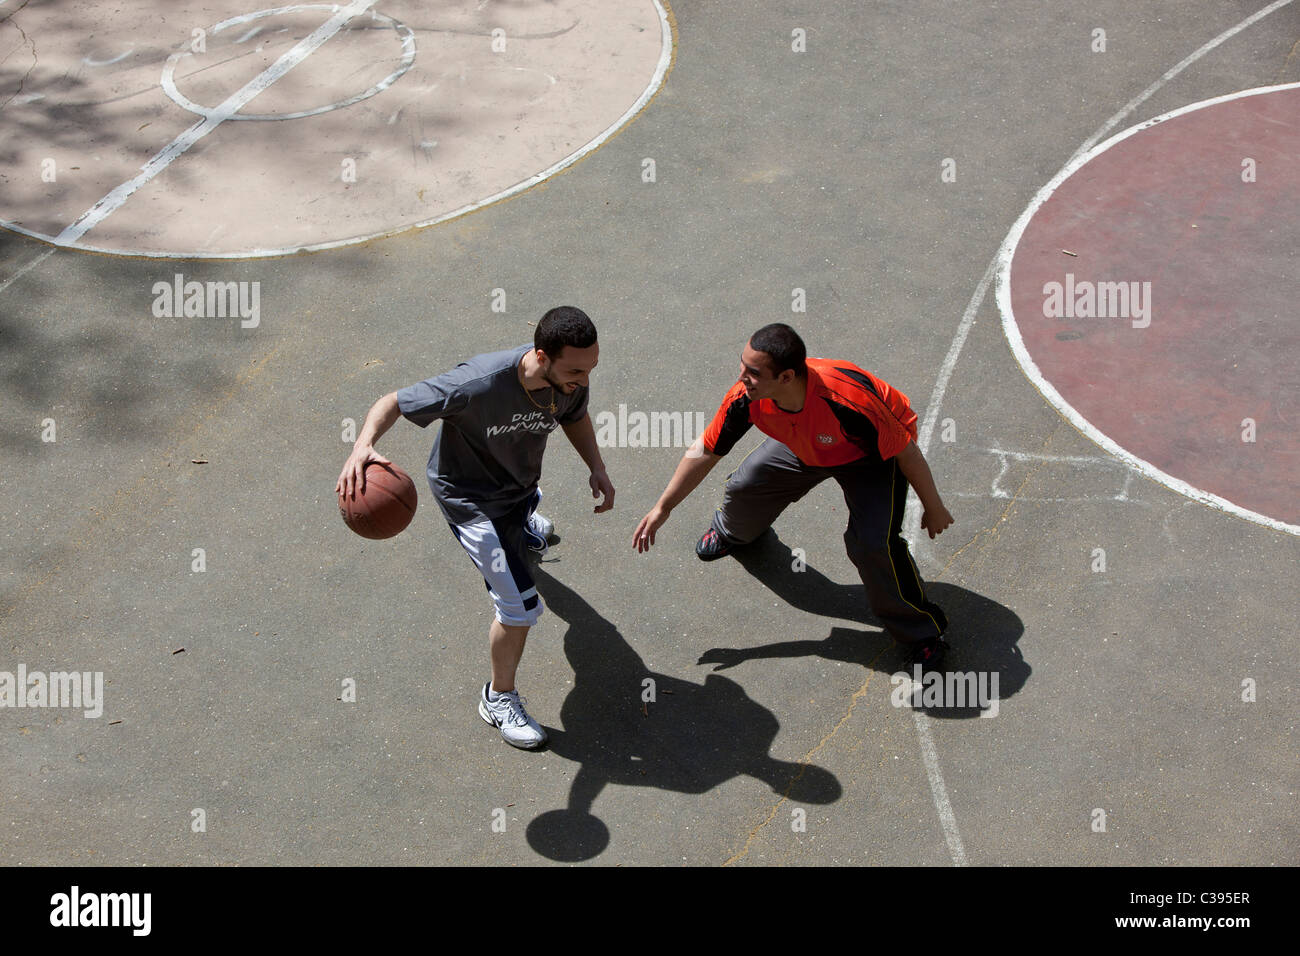 Young adults playing street basketball in Riverside Park, New York City. Stock Photo